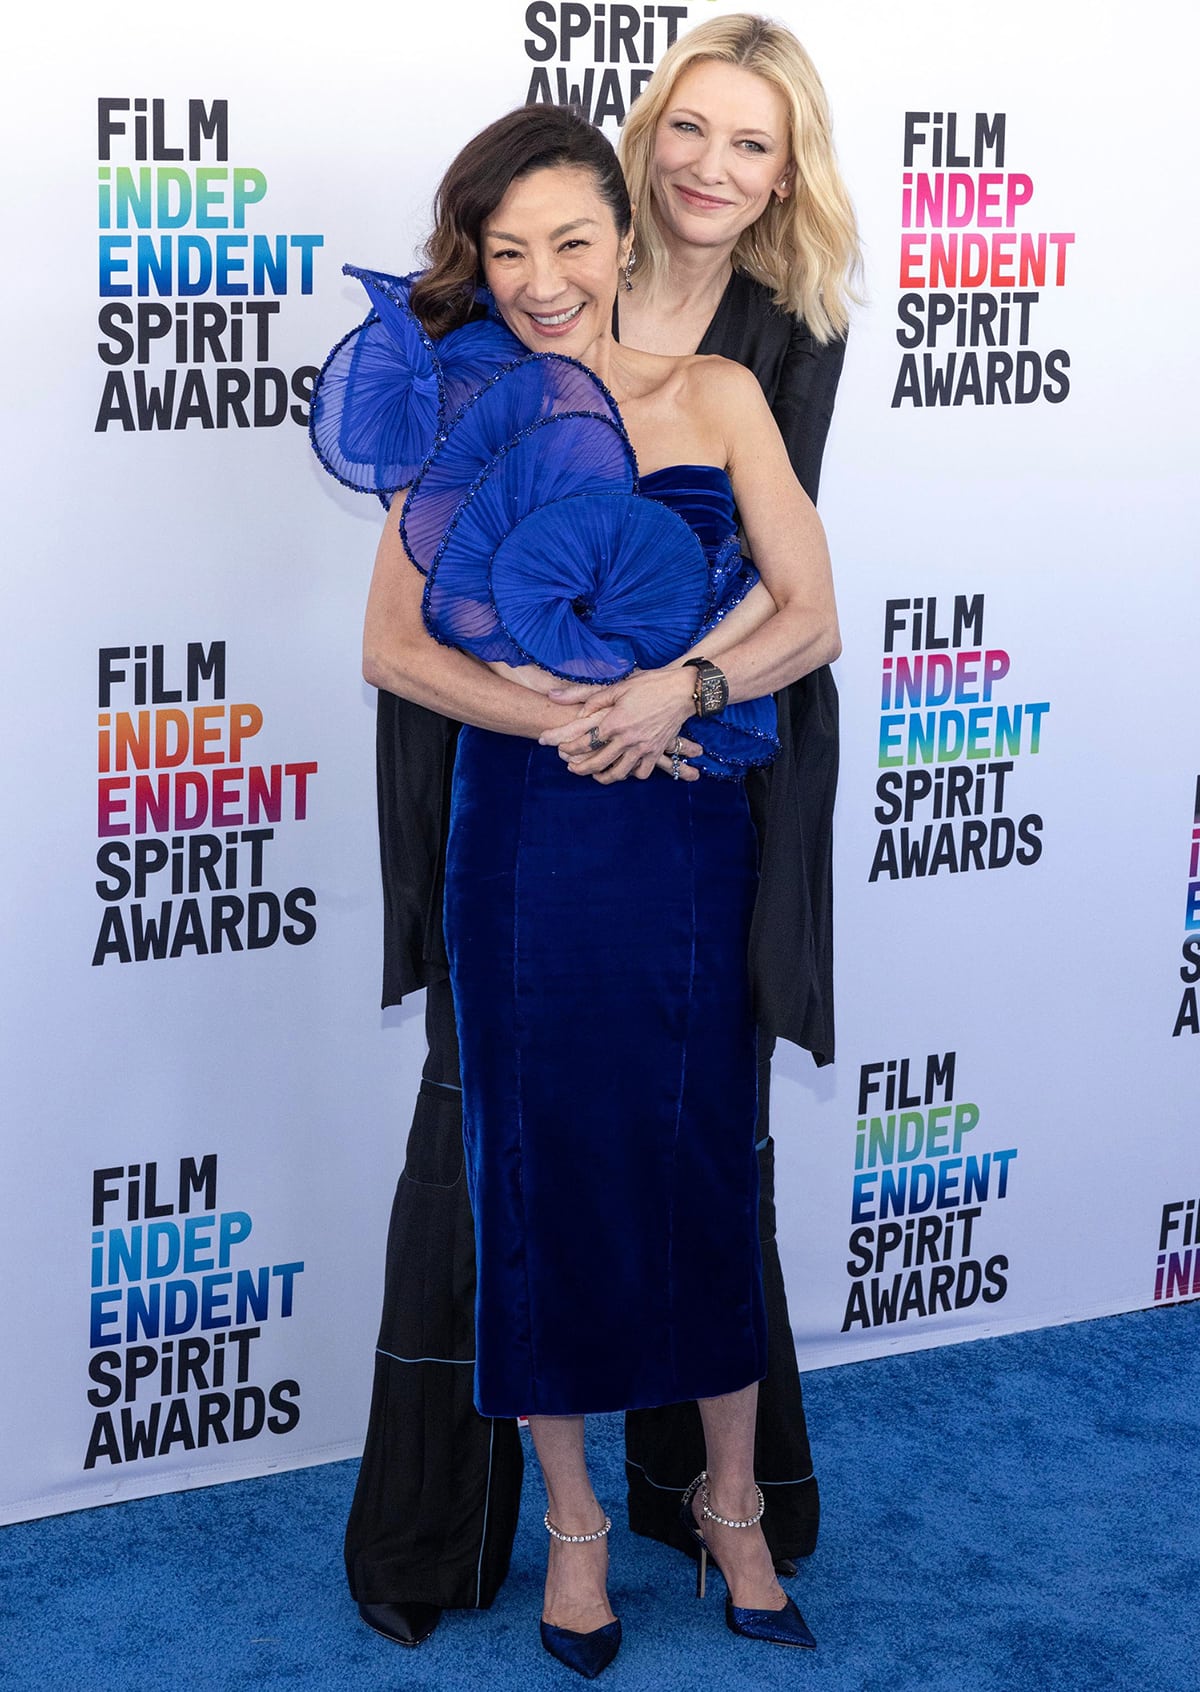 Michelle Yeoh and Cate Blanchett hug at the 38th Film Independent Spirit Awards held at Santa Monica Pier on March 4, 2023